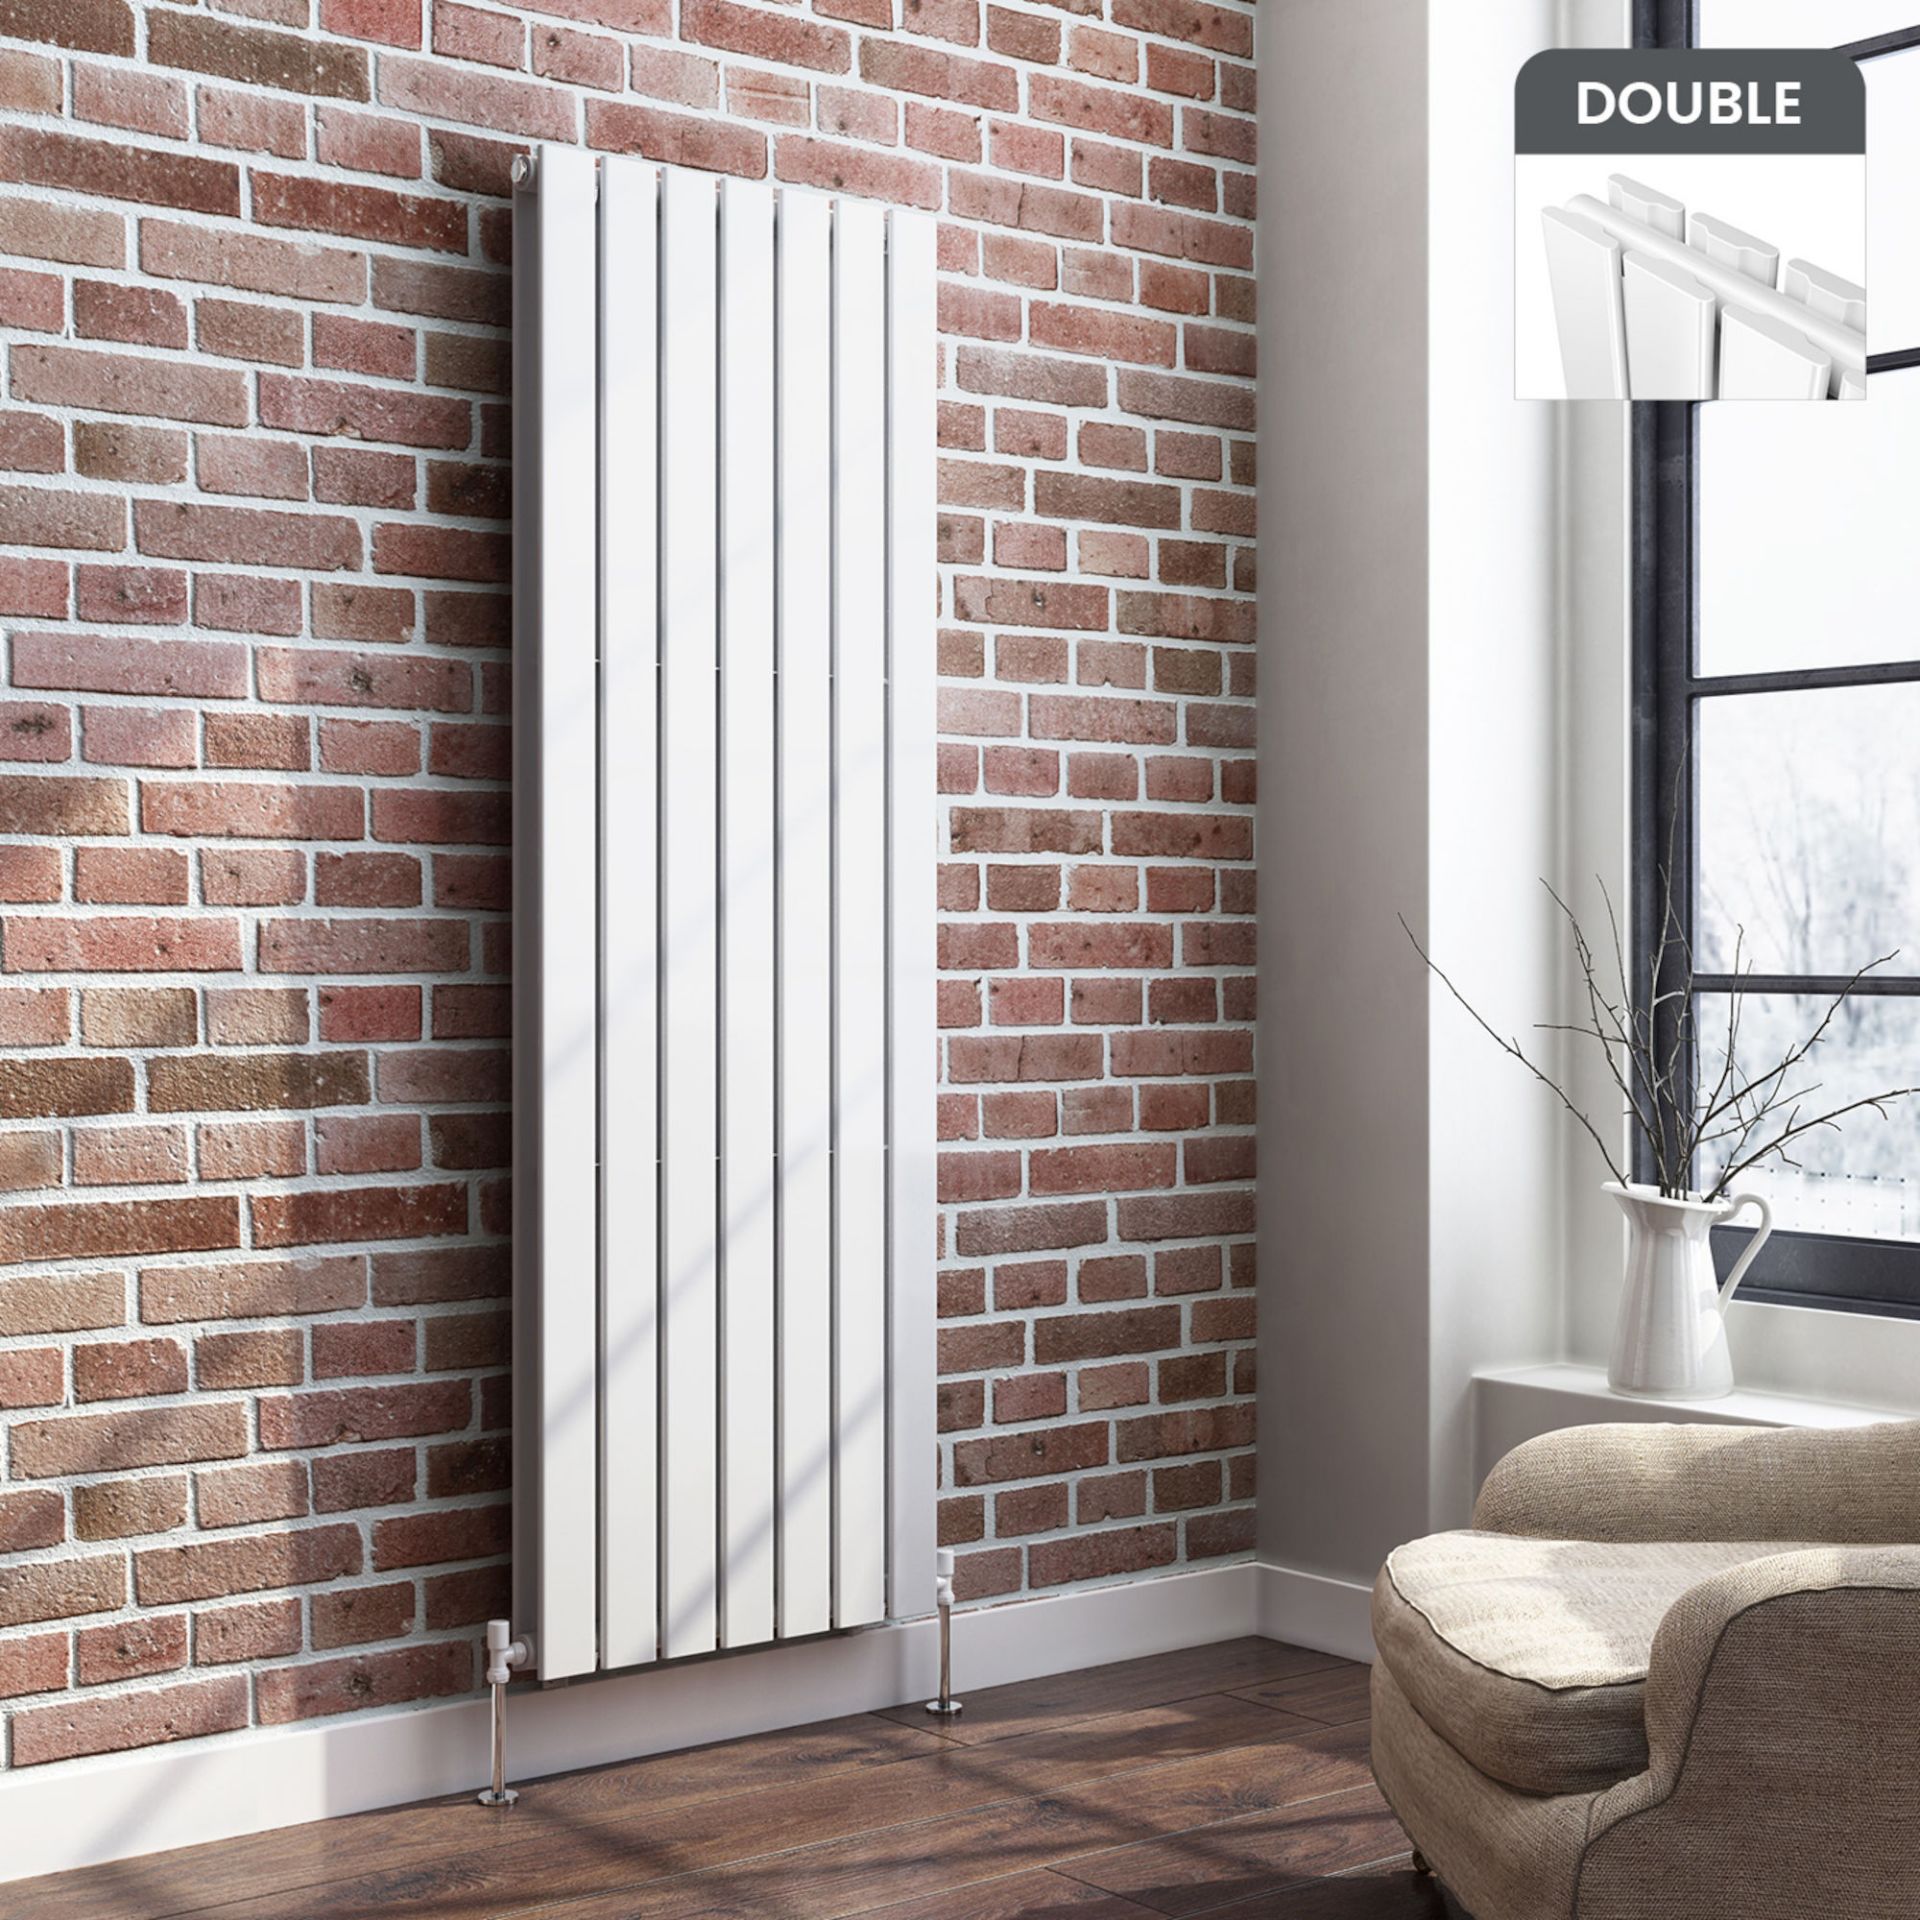 (LP148) 1600x532mm Gloss White Double Flat Panel Vertical Radiator. RRP £499.99. Made from high